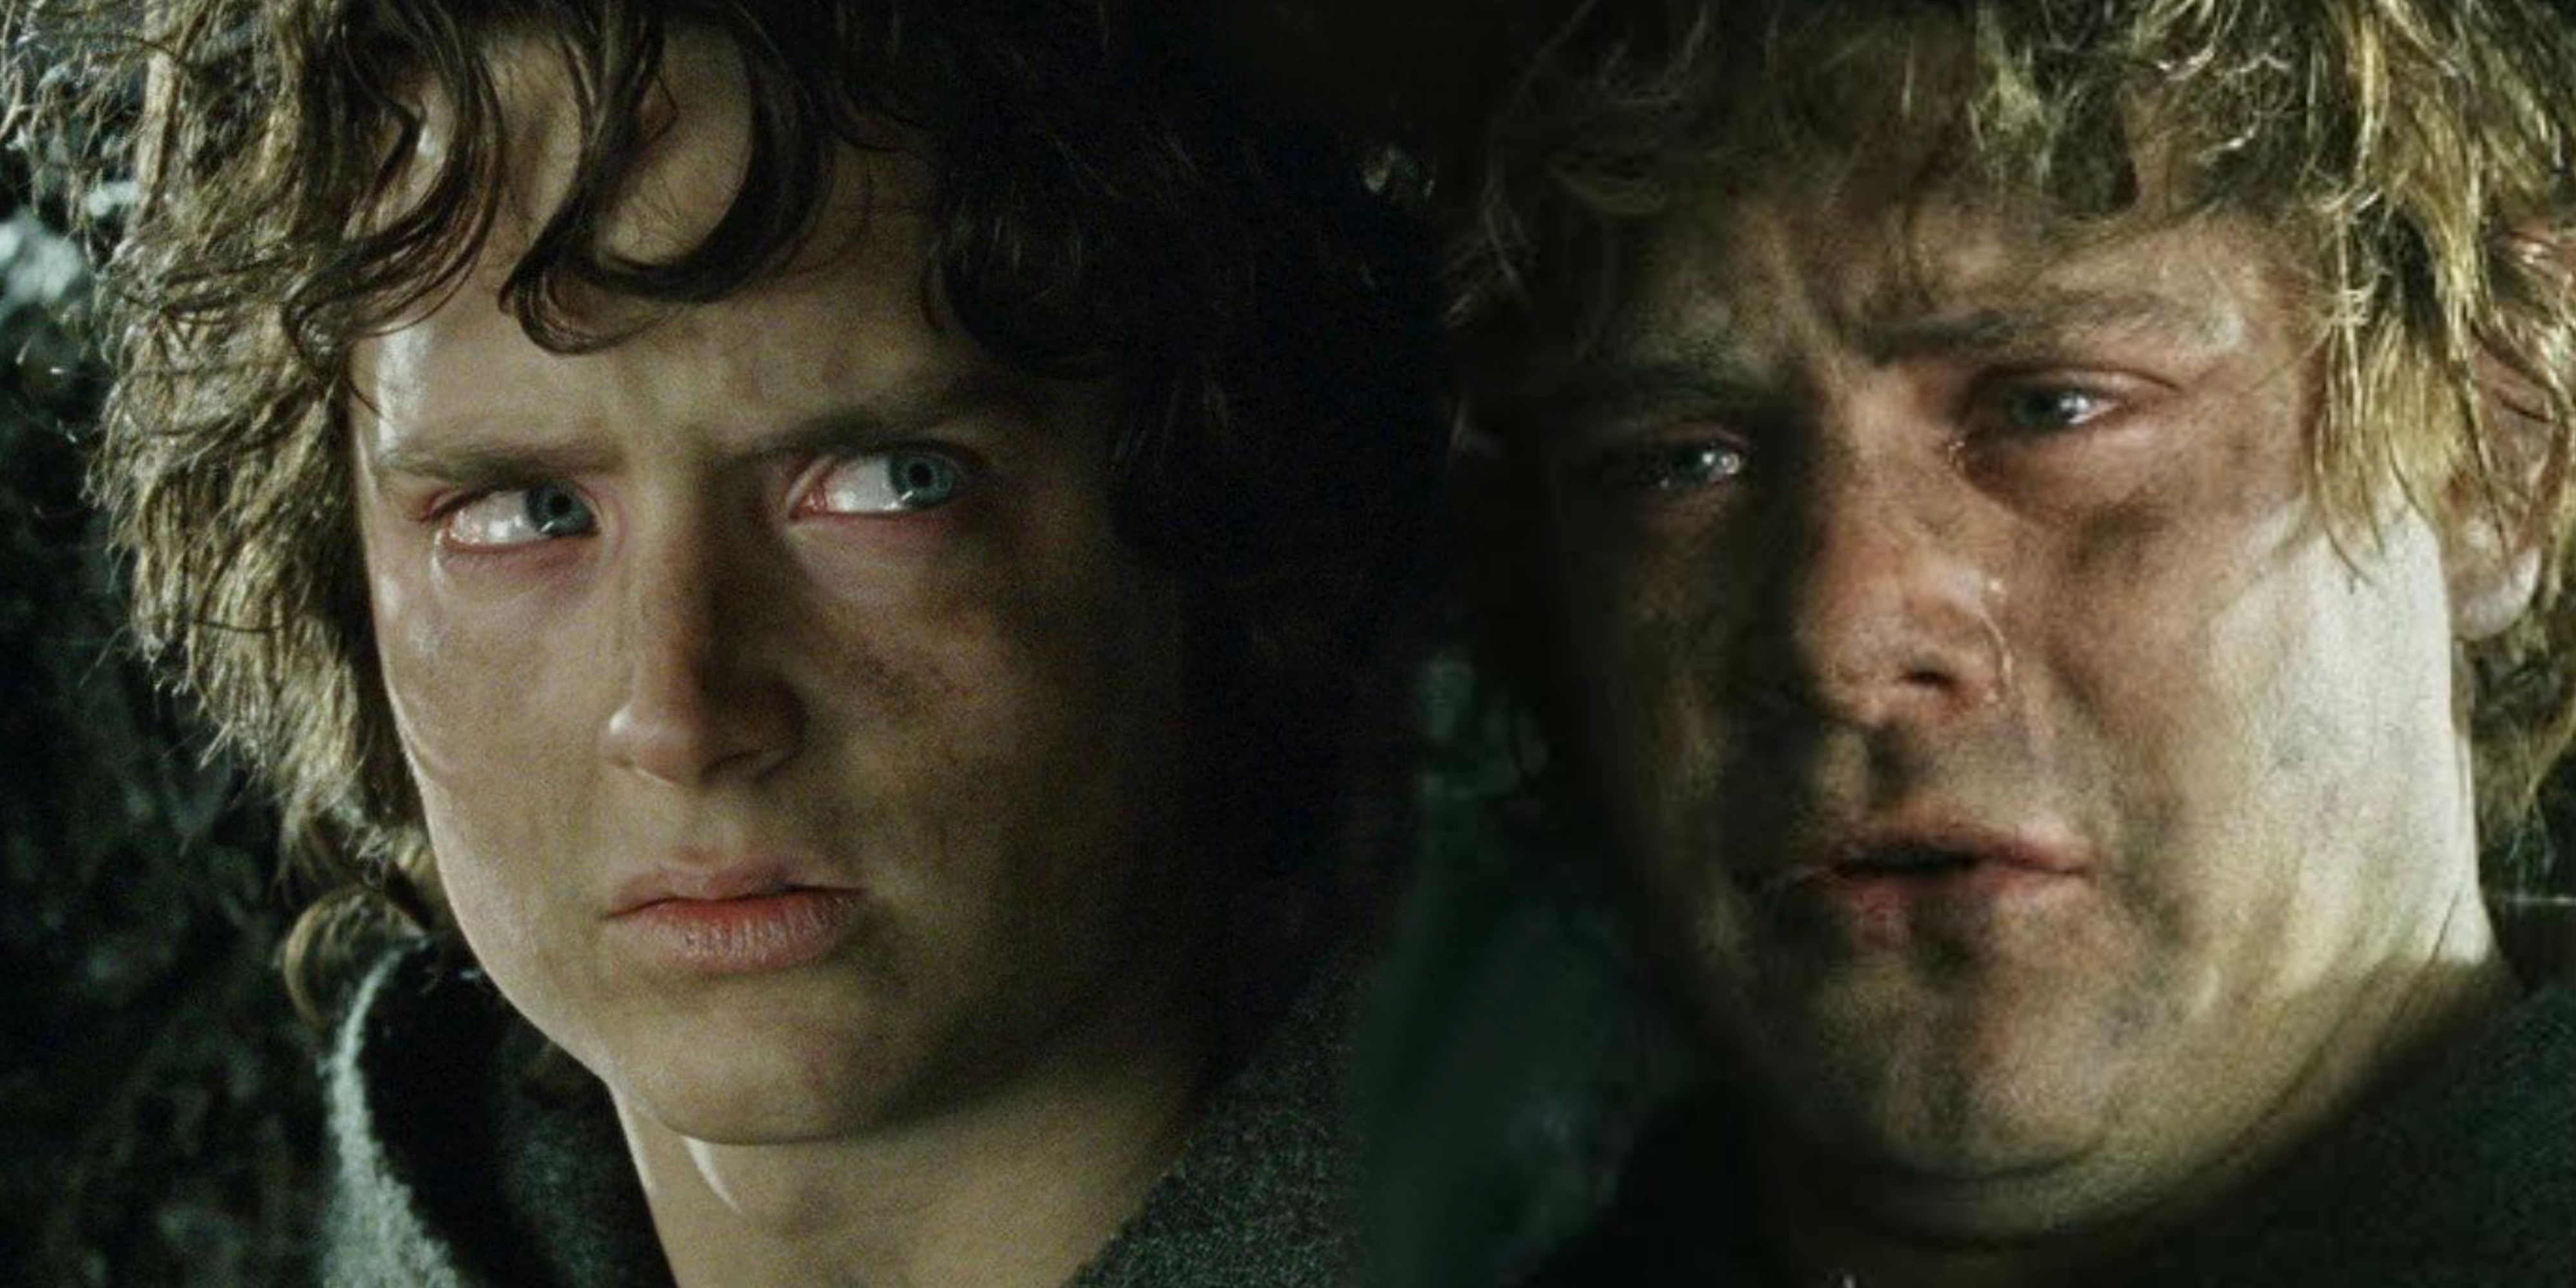 Parting of Frodo and Sam